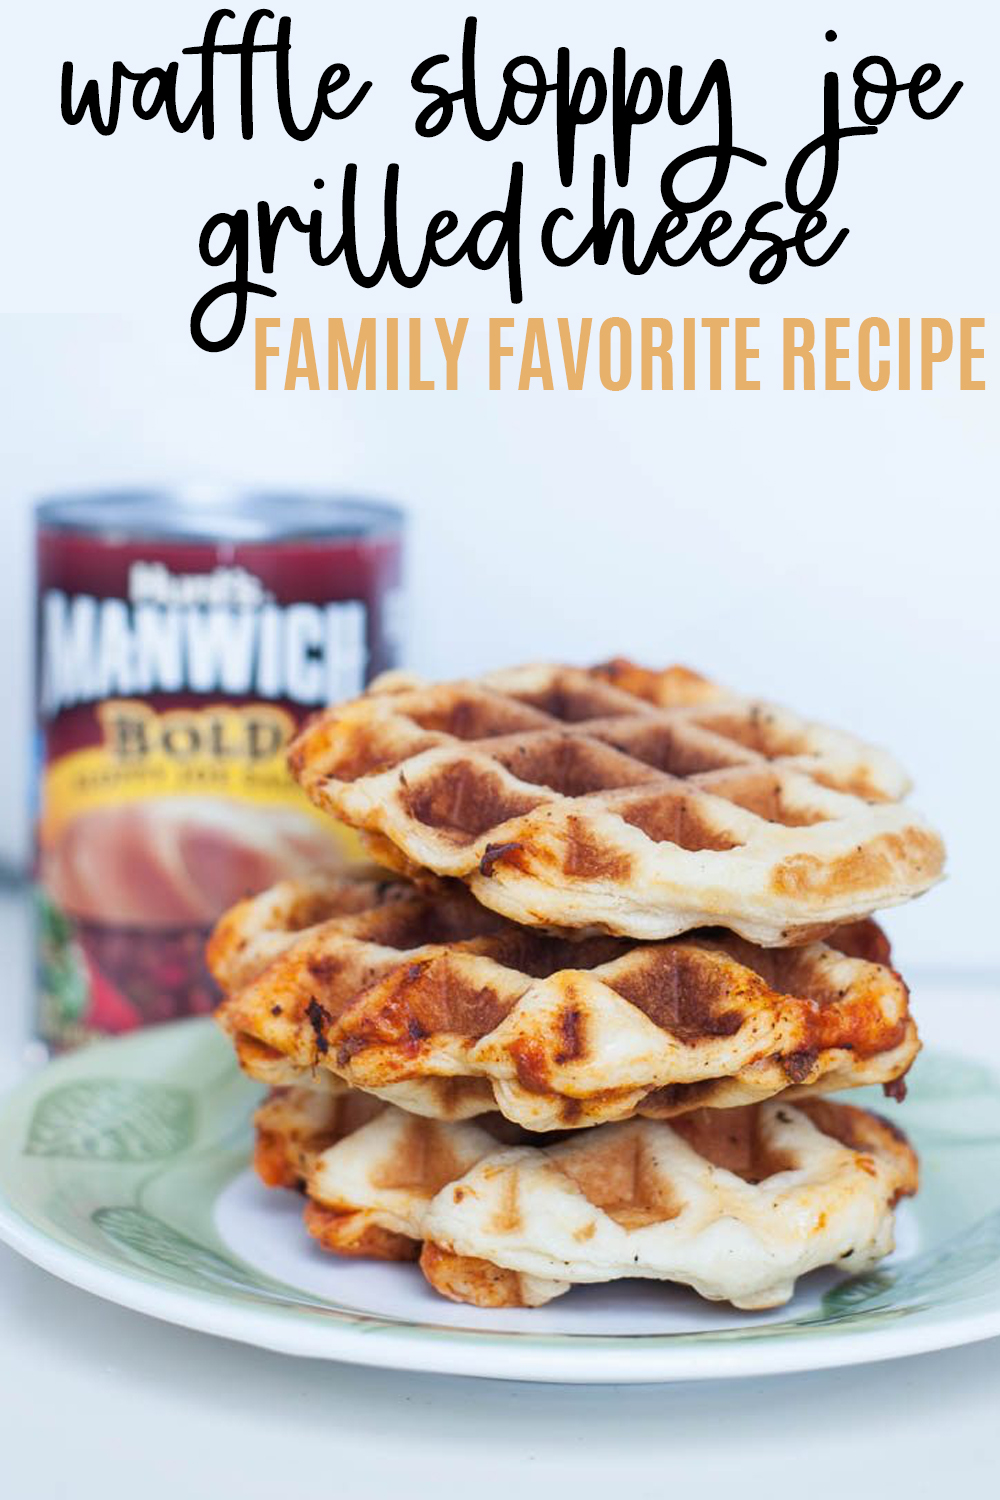 Waffle Sloppy Joes, a new Family Favorite. | All Things Thrifty